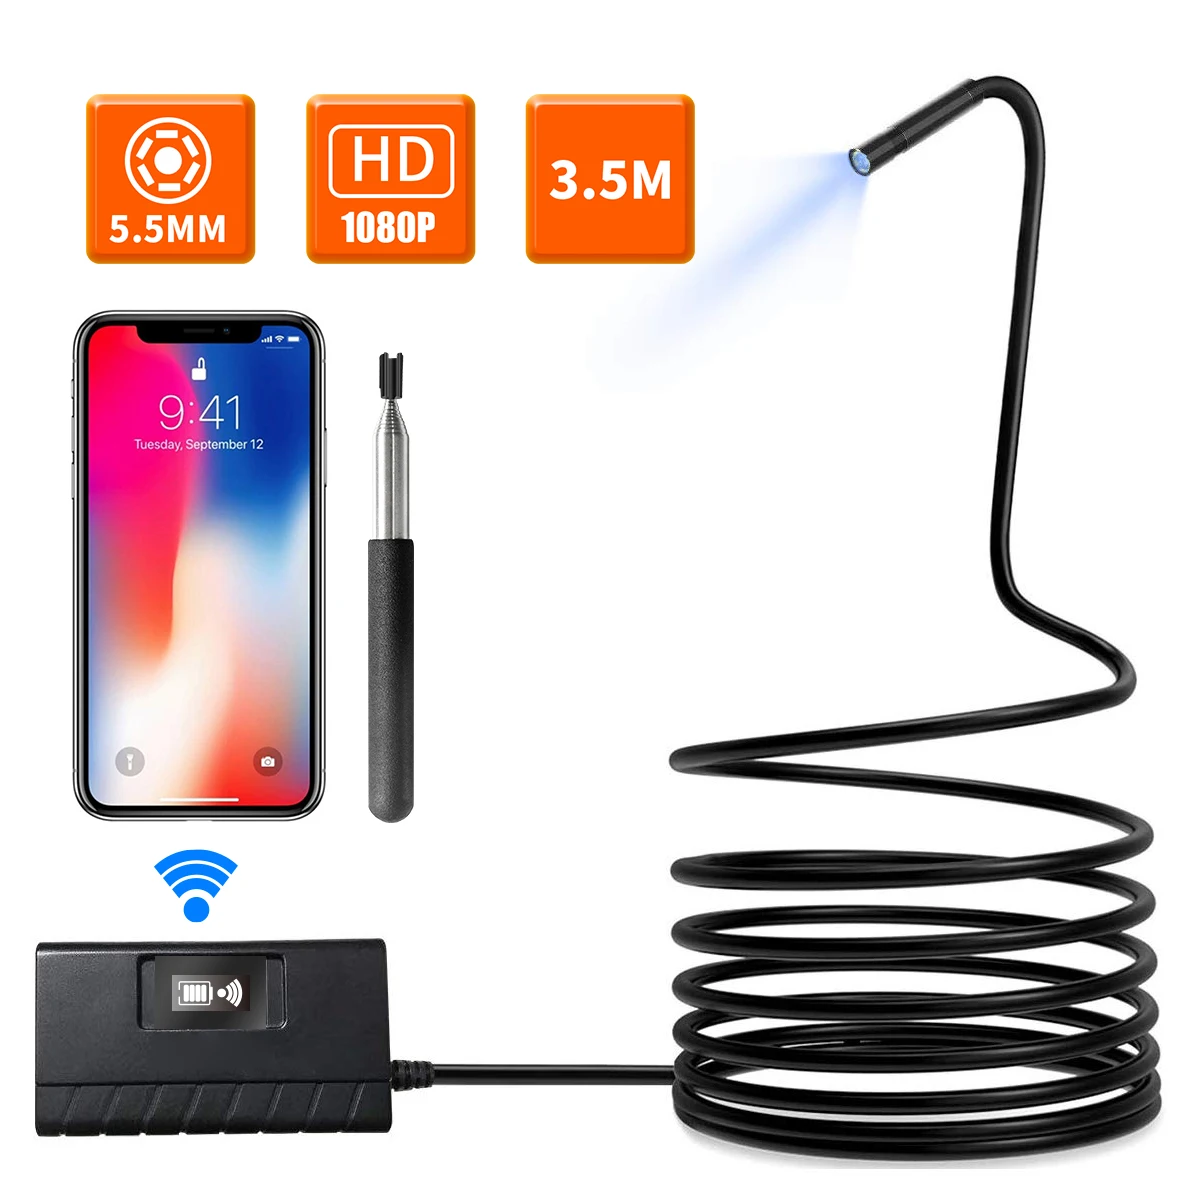 2MP 1080P 5.5MM Wireless WIFI Endoscope Inspection Otoscope Camera CMOS Borescope For Android&ISO Smart Phone Digital Microscope 2mp 1080p wifi intra oral endoscope for tooth cleaning cmos borescope inspection digital microscope camera wireless otoscope